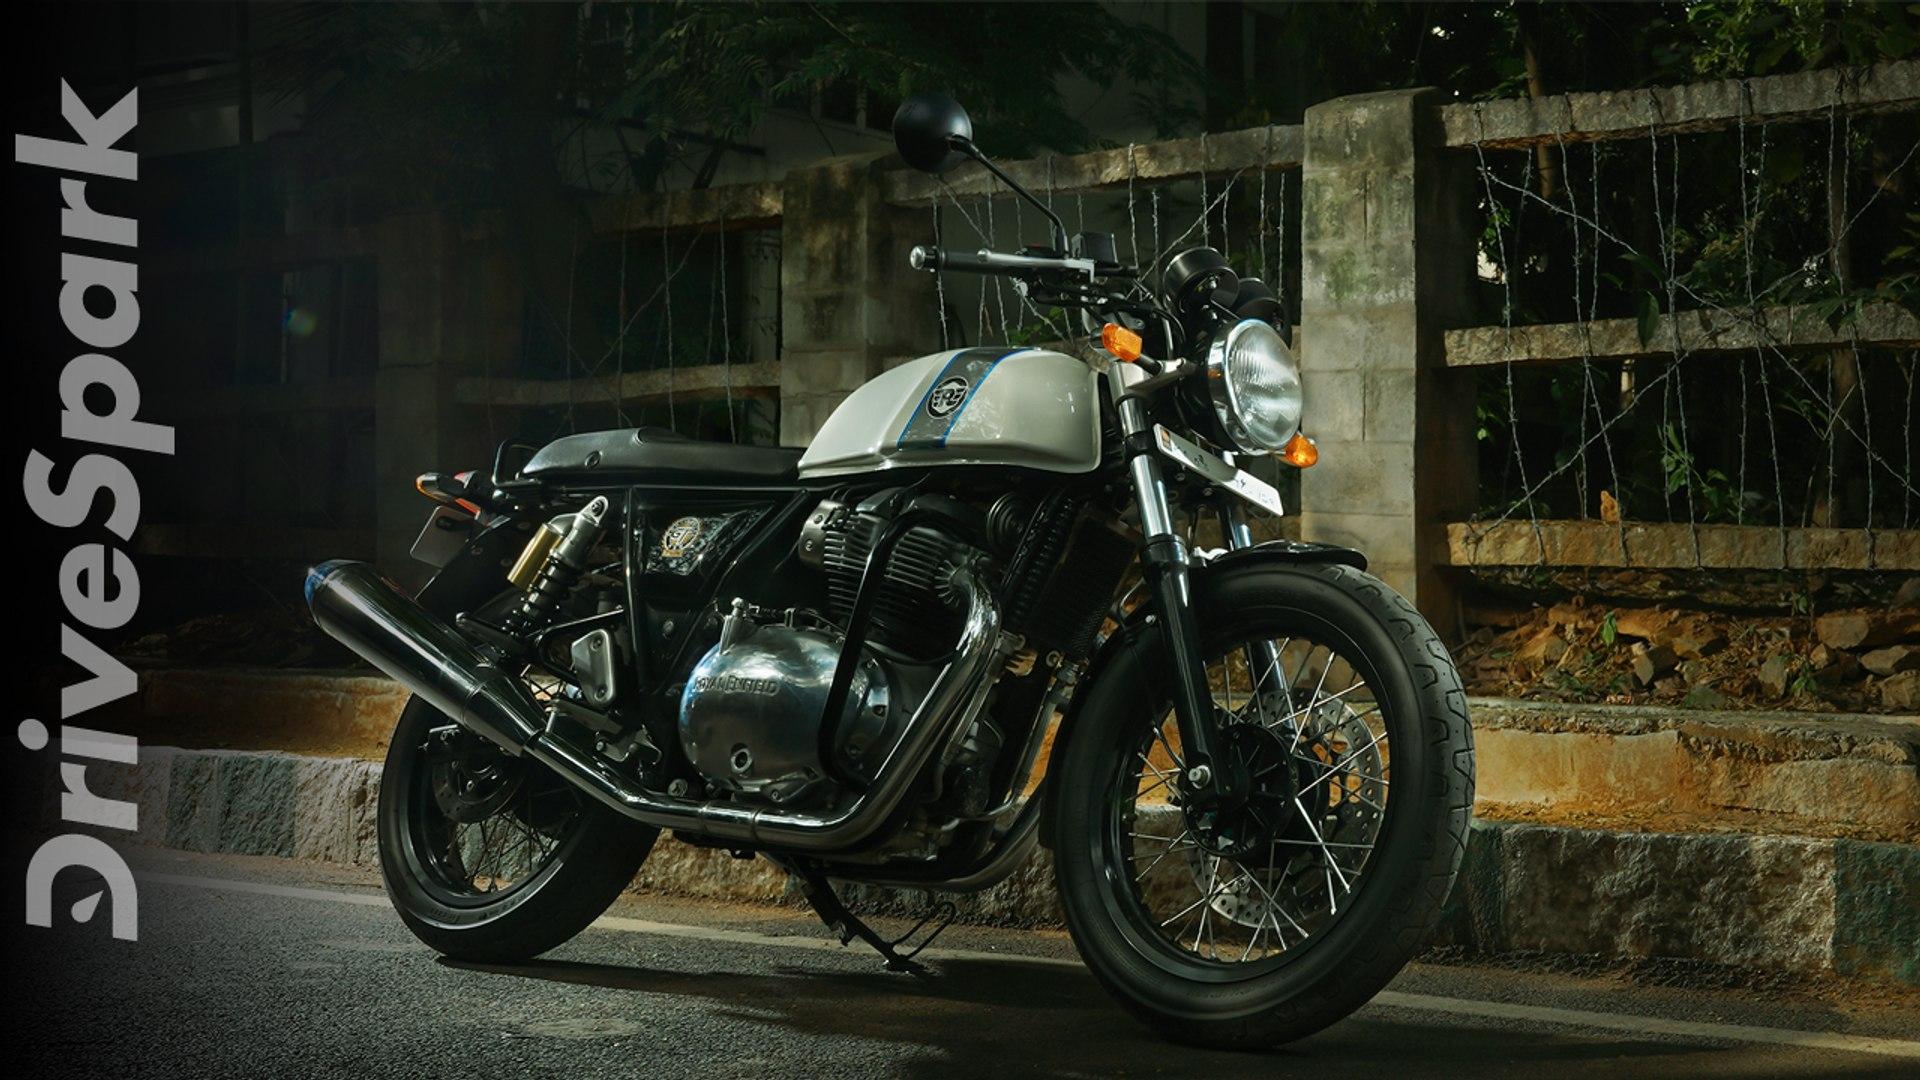 Royal Enfield Continental GT 650 Review: The Best Value For Money